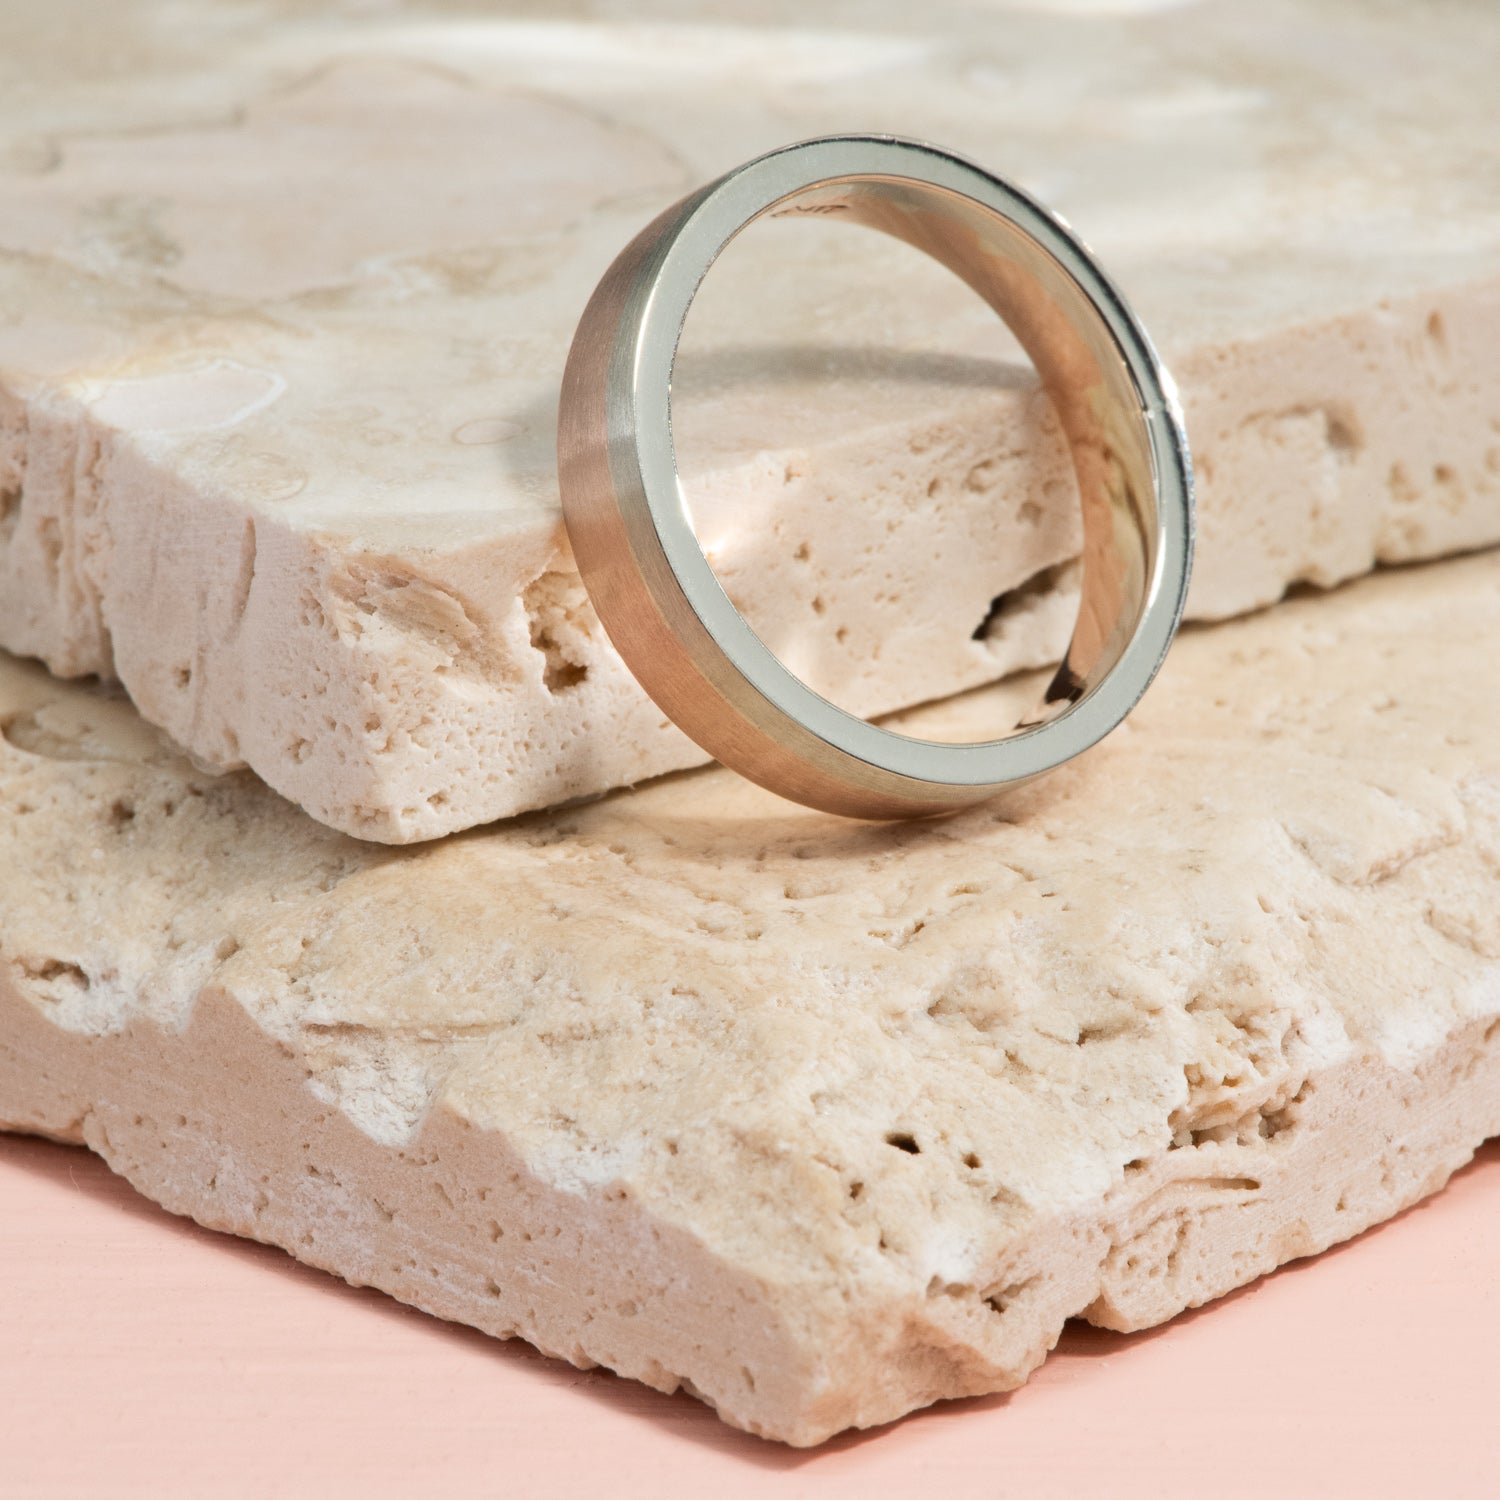 Brushed white and rose gold in clean striped all the way around a ring.